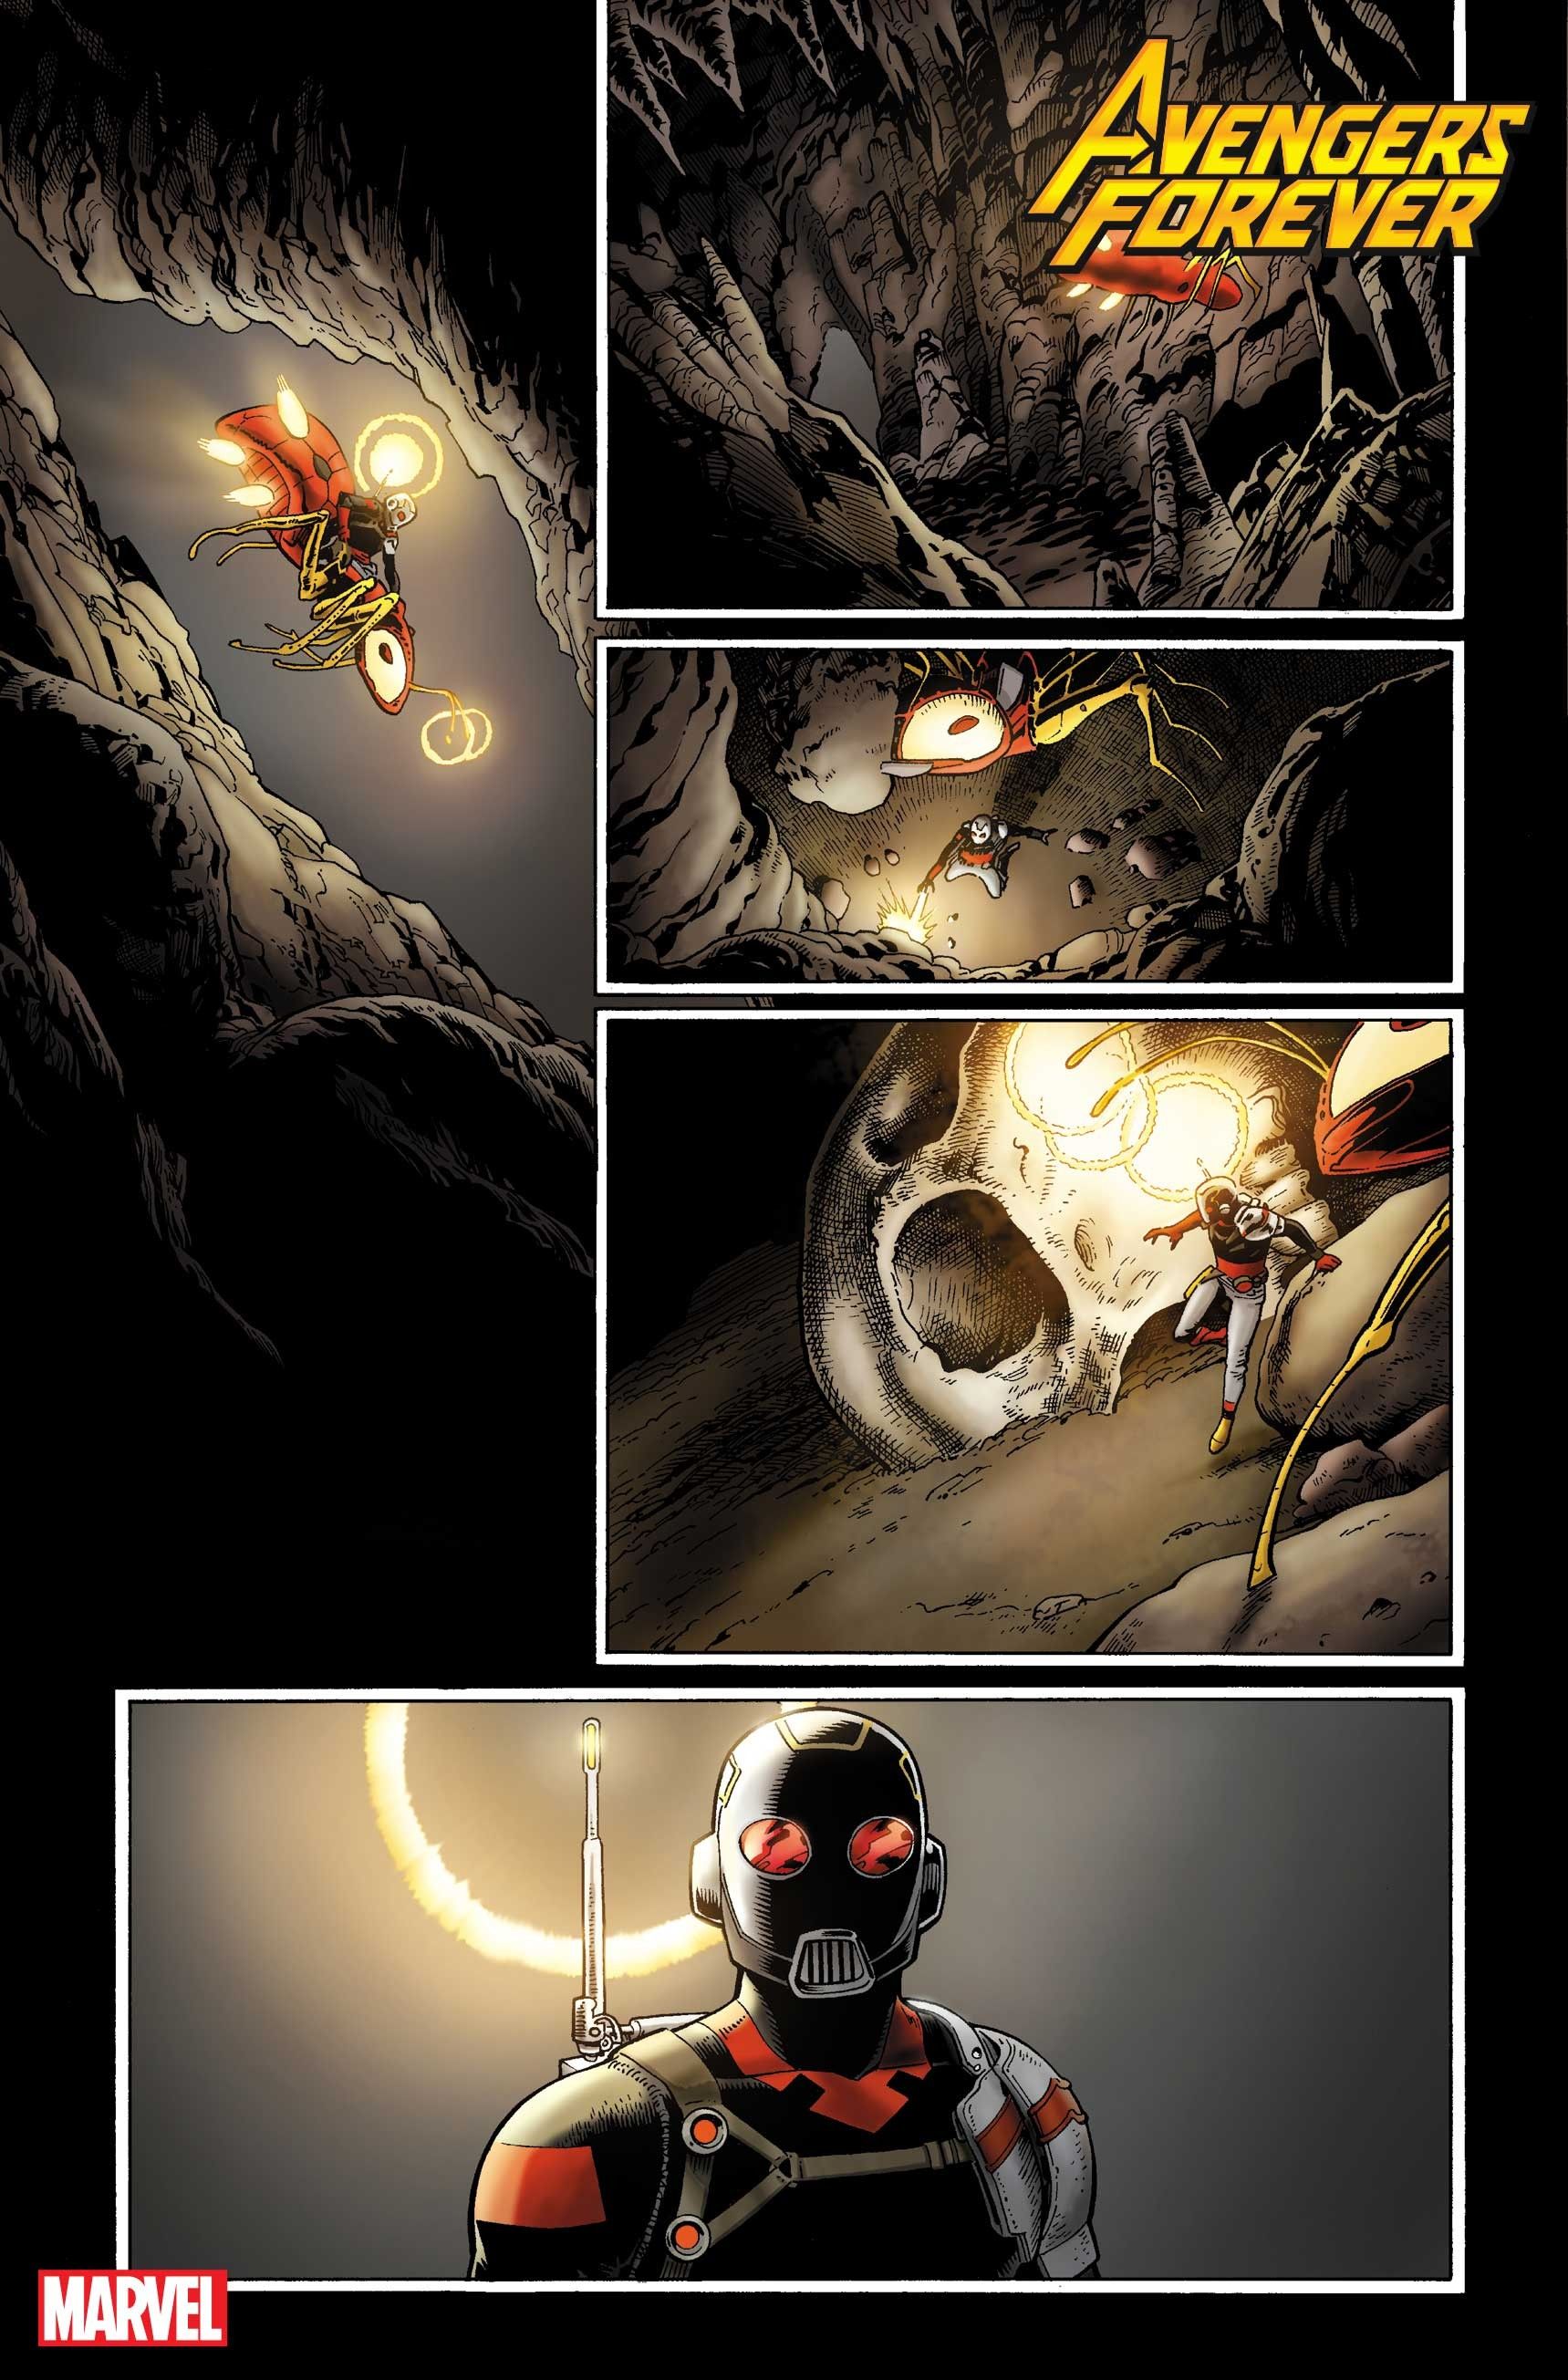 Avengers Forever preview page 1 Ant-Man Tony Stark